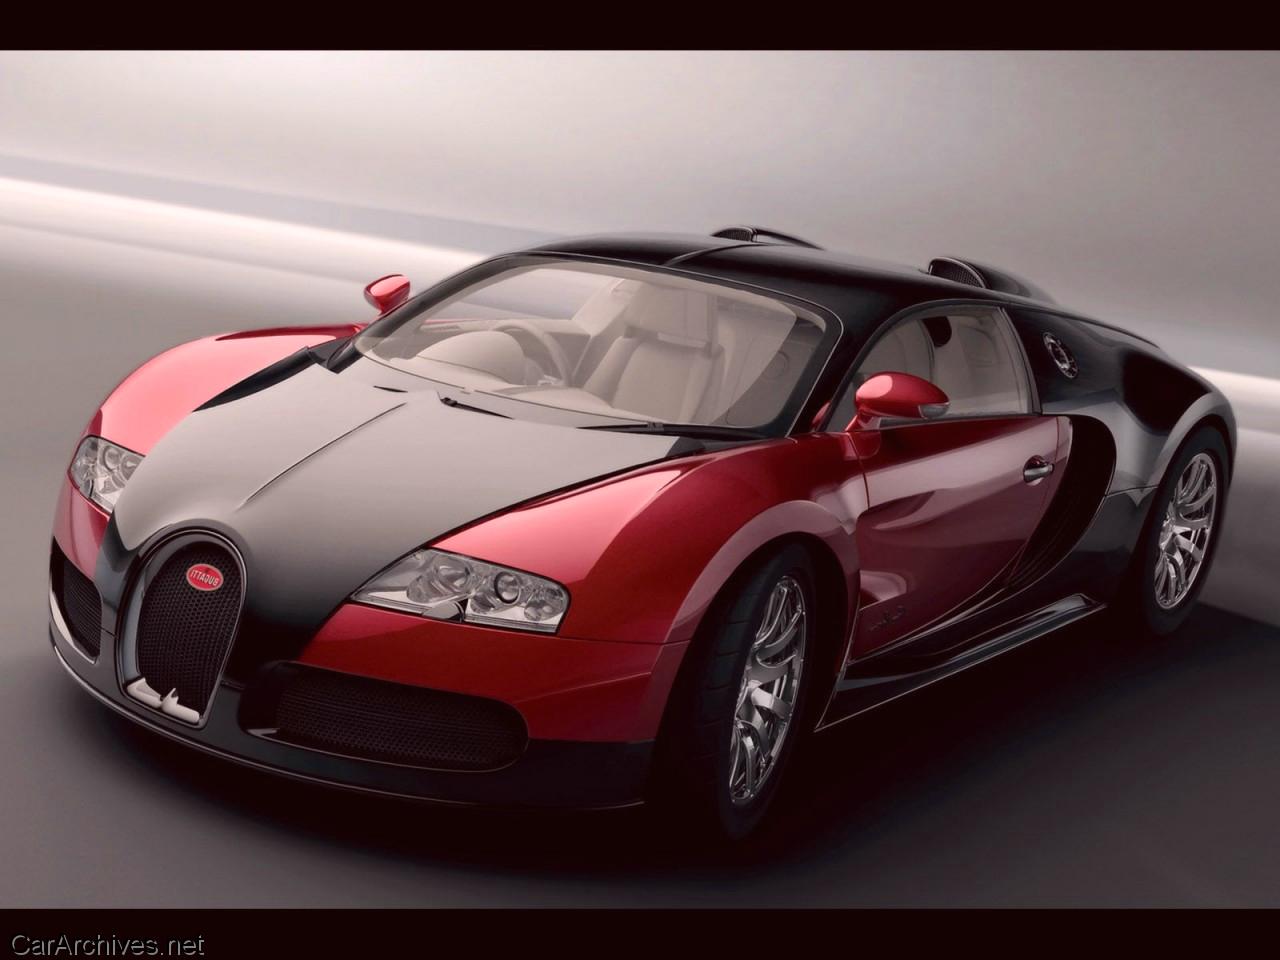 Free Download Red And Black Bugatti Veyron Wallpaper 1280x960 For Your Desktop Mobile Tablet Explore 75 Black Bugatti Veyron Wallpaper Bugatti Veyron Wallpaper For Desktop Bugatti Wallpapers For Desktop